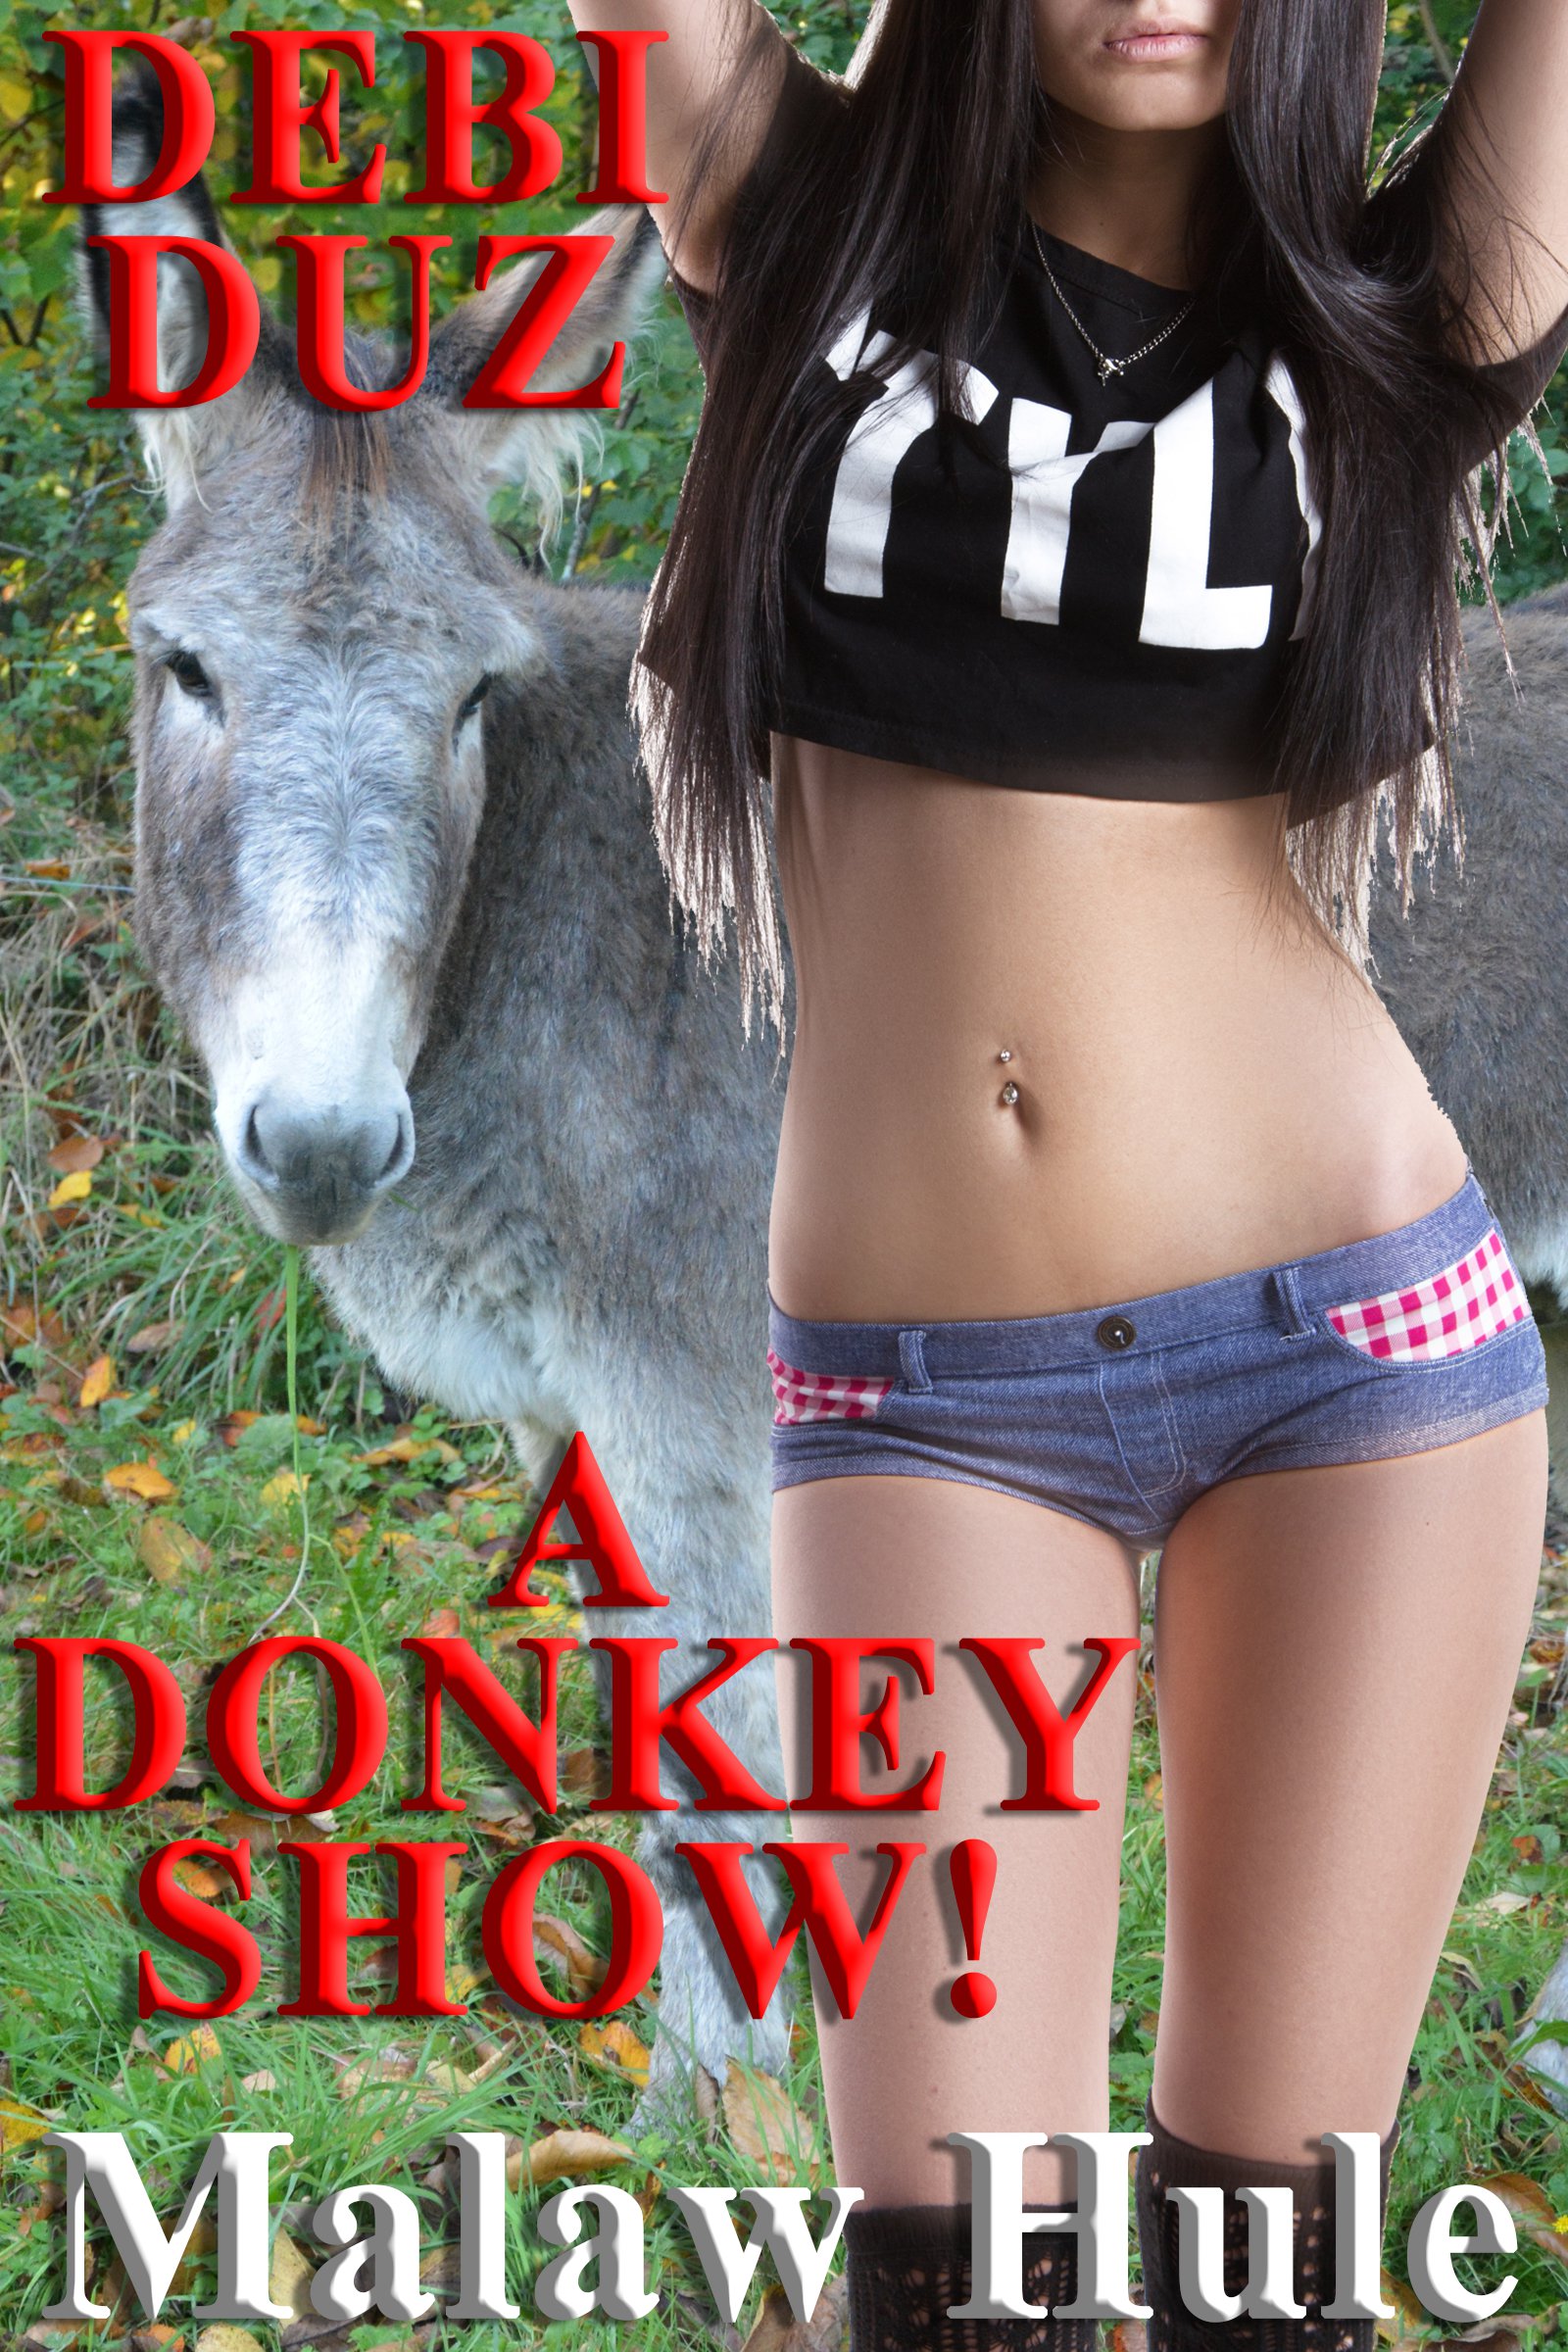 Mexican Donkey Show Video